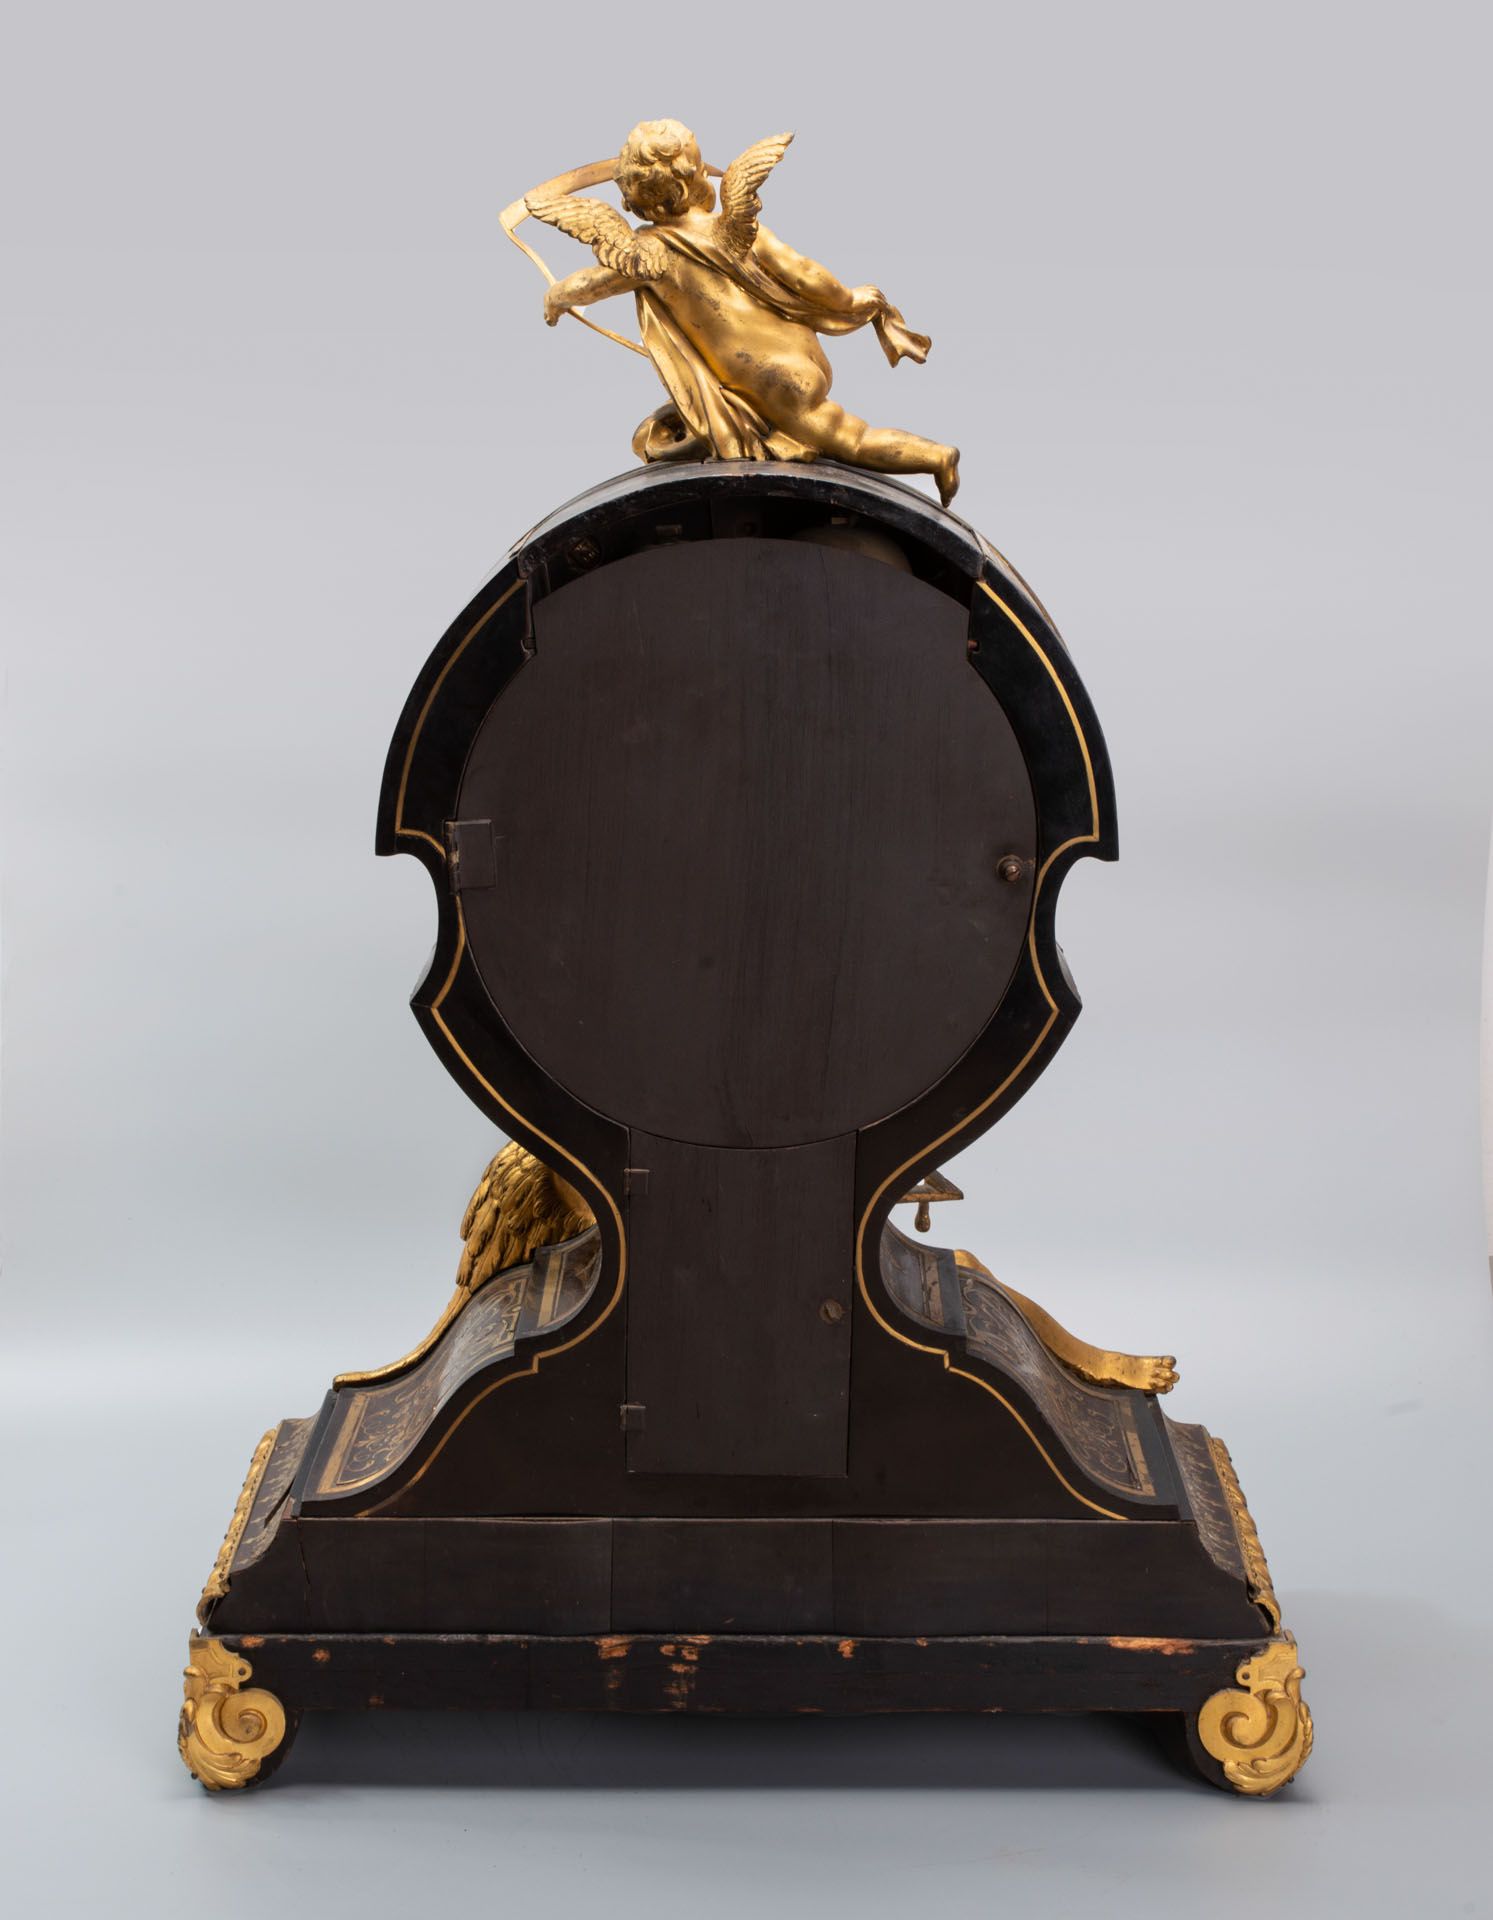 A Magnificent Antoine Gaudron Louis XVI Wood and Gilt Bronze Clock, France, Late 17th Early 18th Cen - Bild 4 aus 6